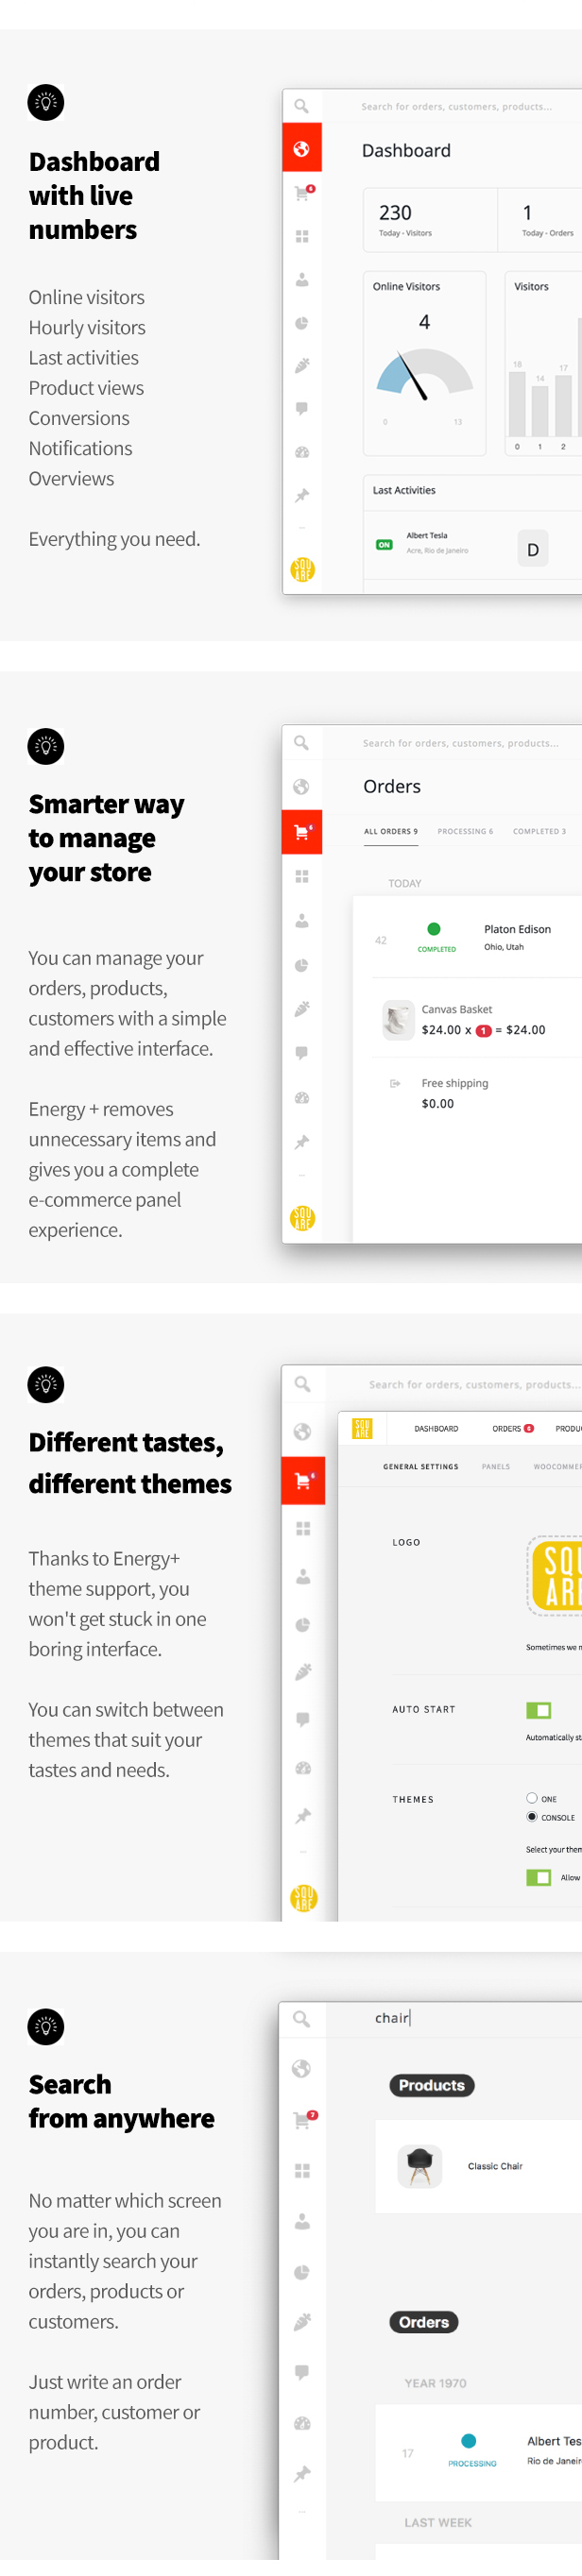 Energy+ A attractive admin panel for WooCommerce